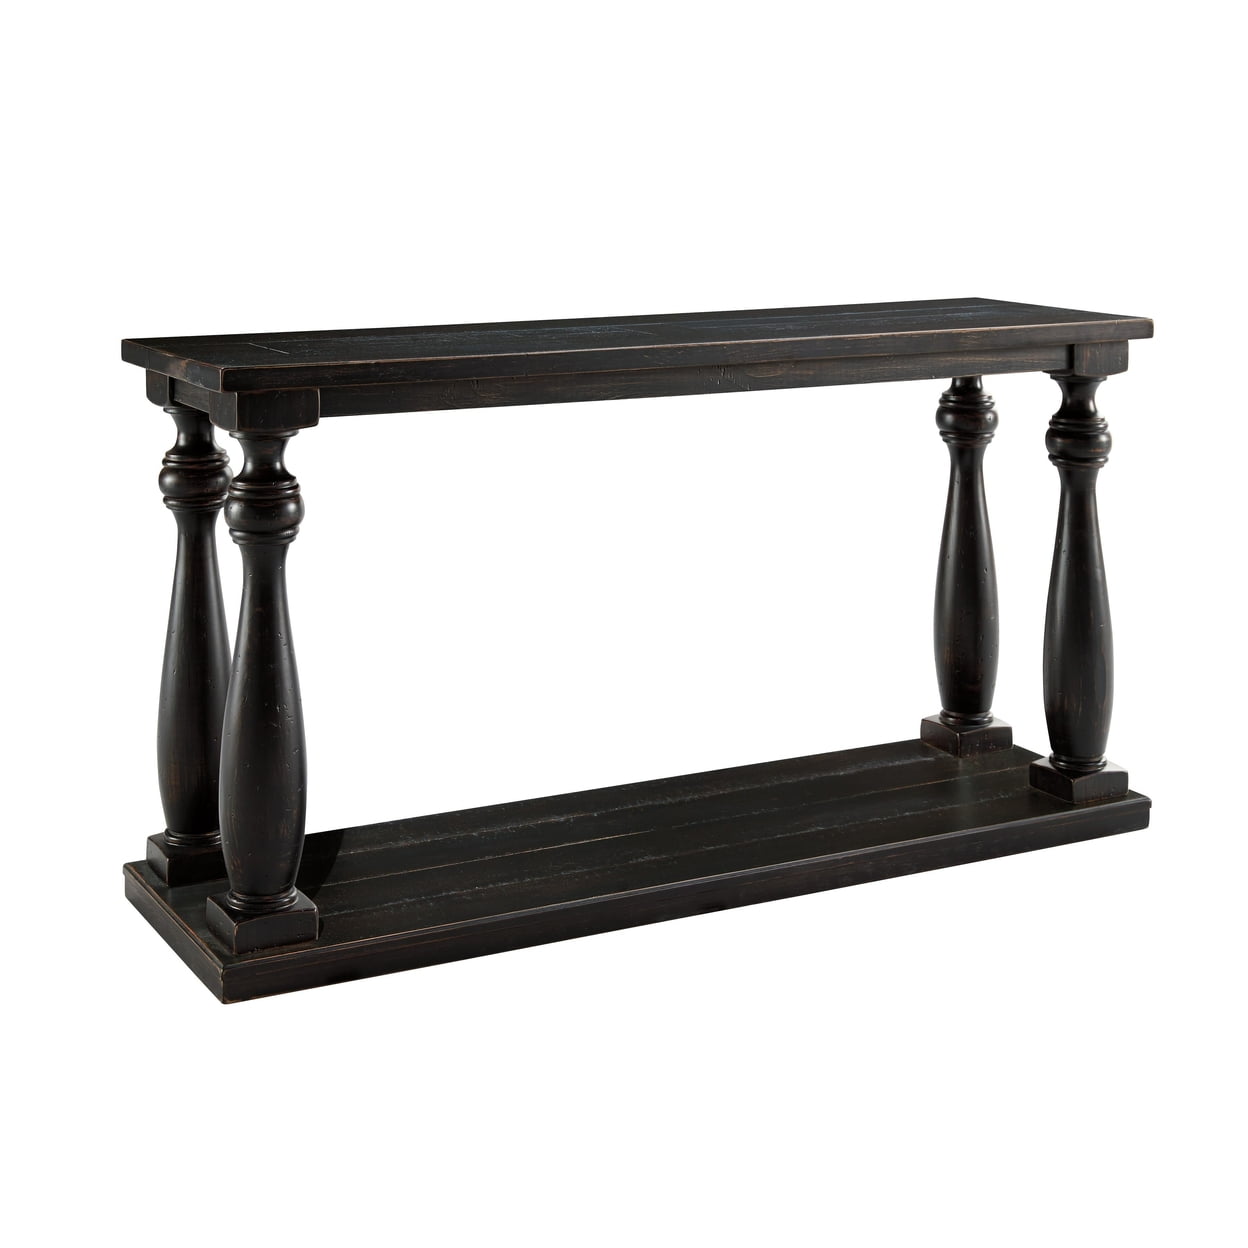 Picture of Benjara BM210921 Wire Brush Wooden Frame Sofa Table with Turned Legs - Antique Black - 32 x 60 x 17.88 in.